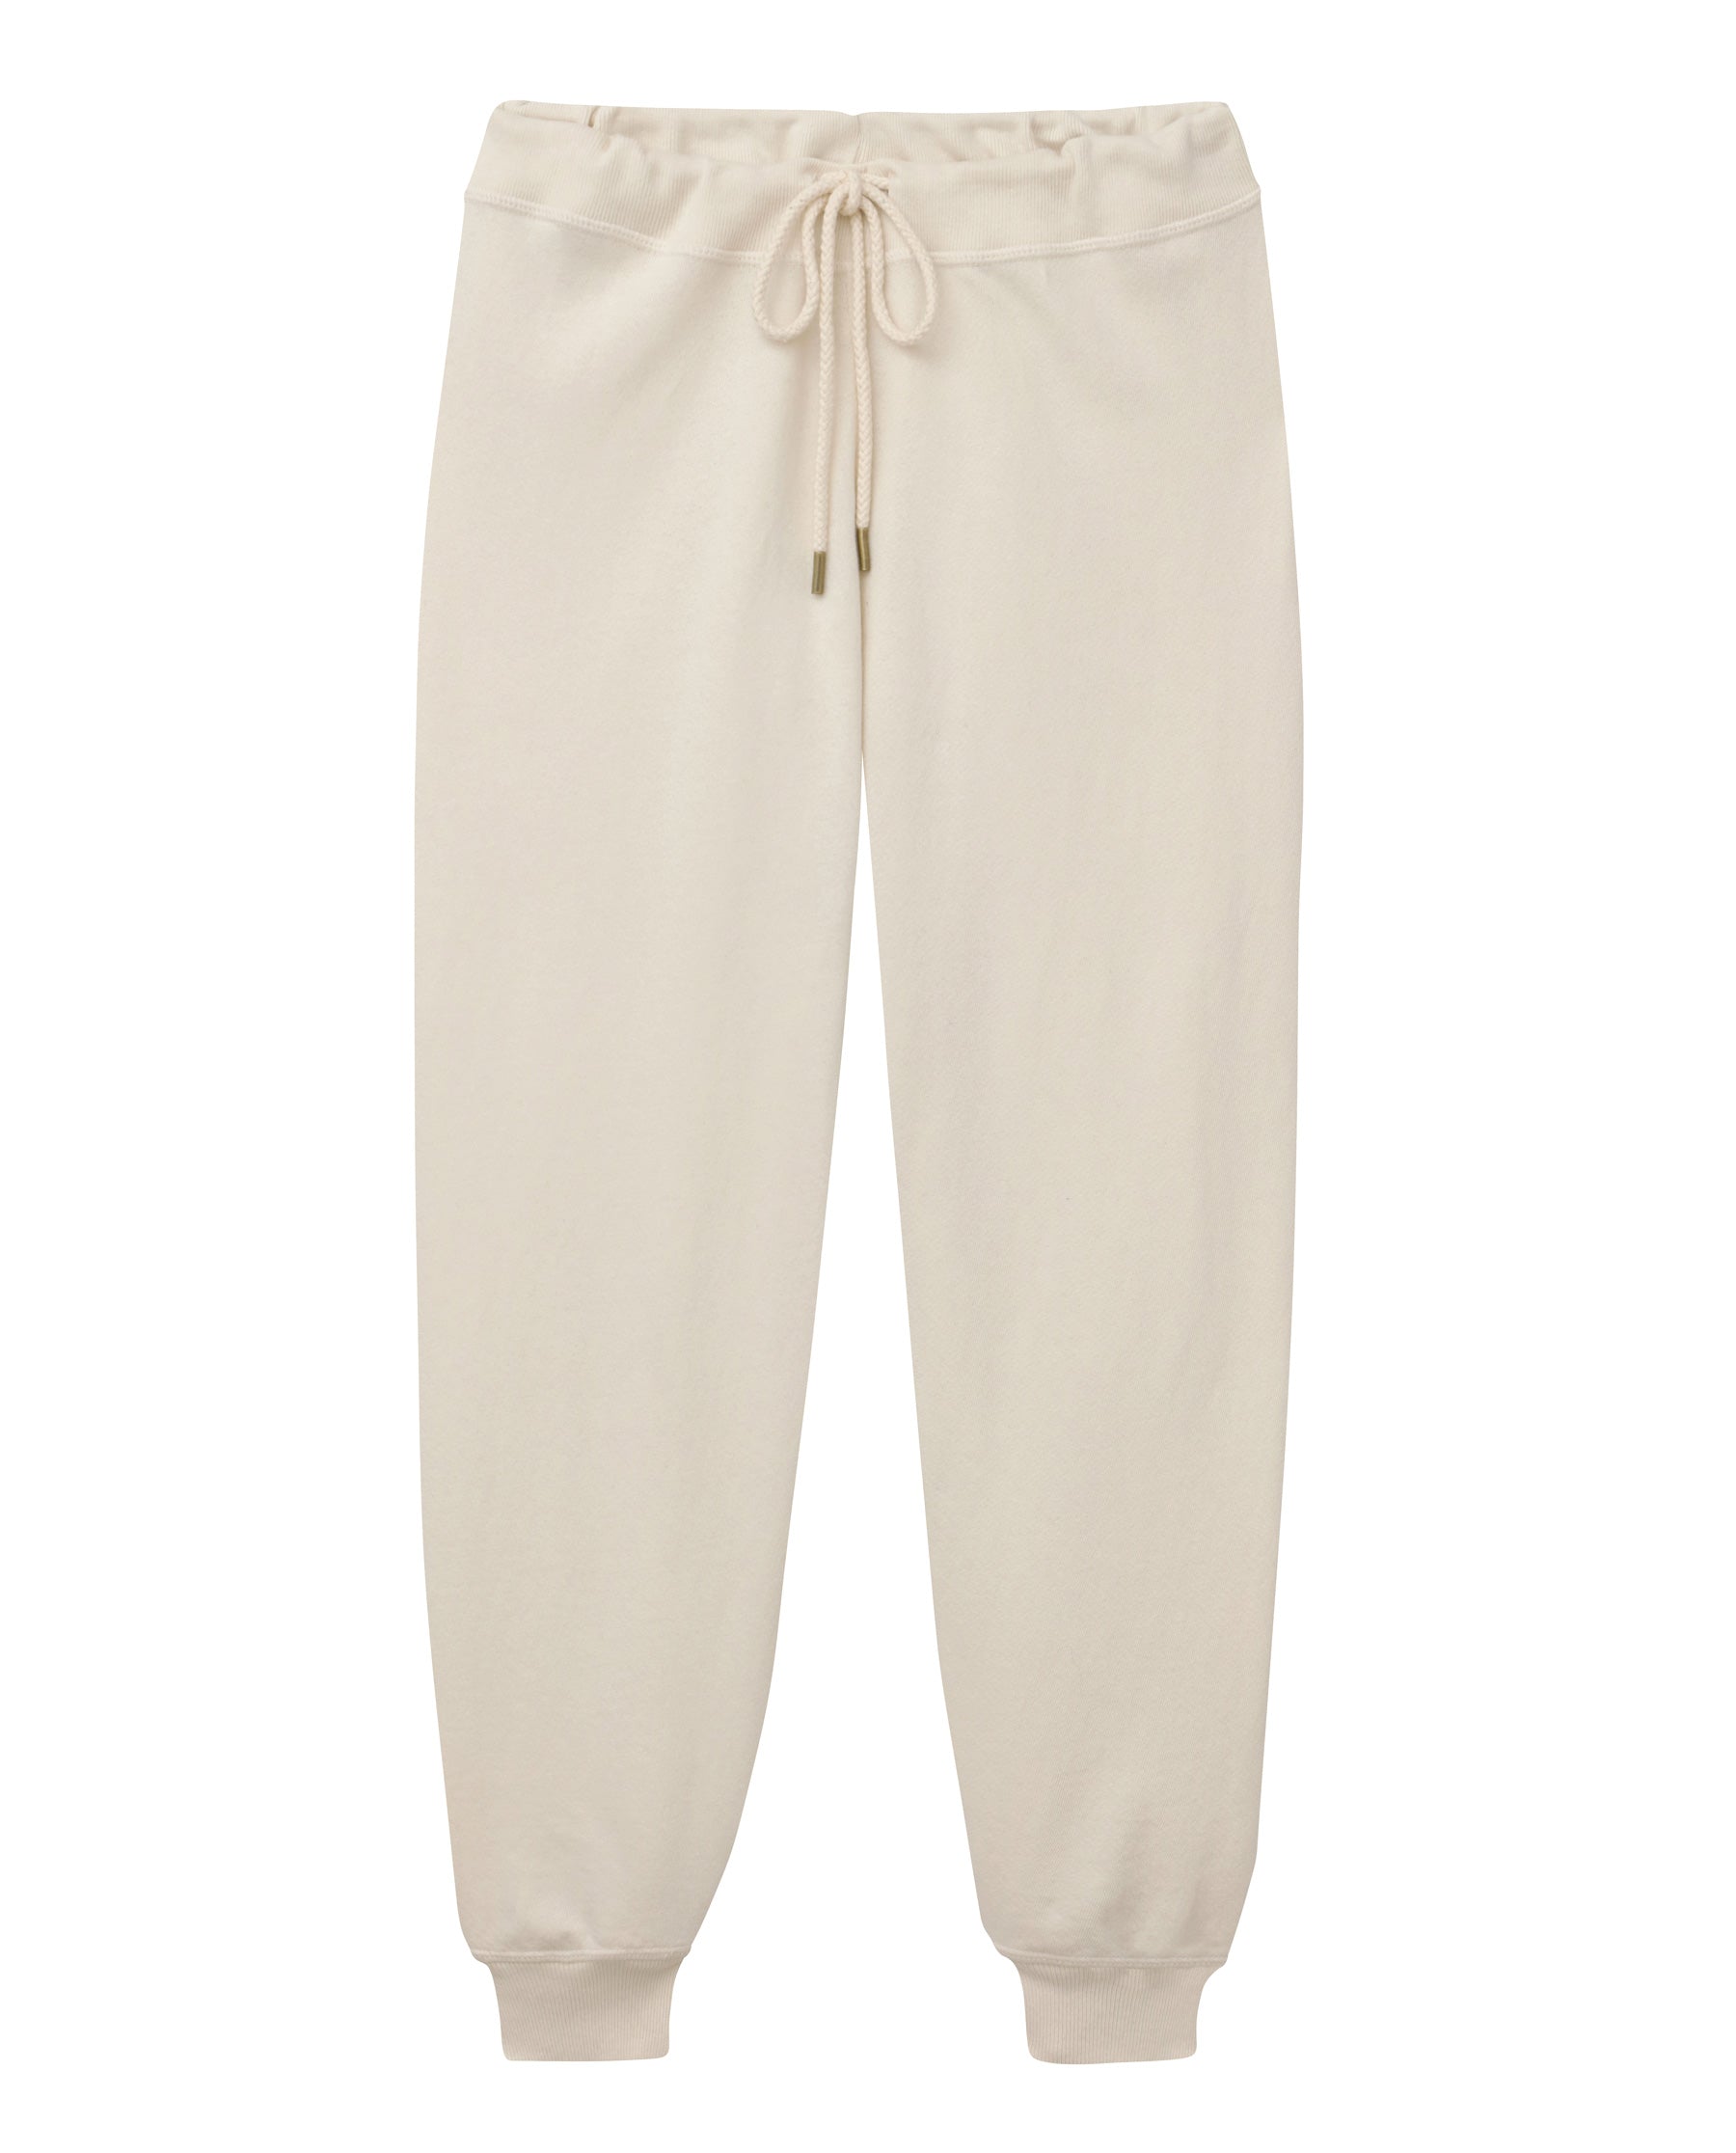 The Cropped Sweatpant. Solid -- Washed White SWEATPANTS THE GREAT. CORE KNITS